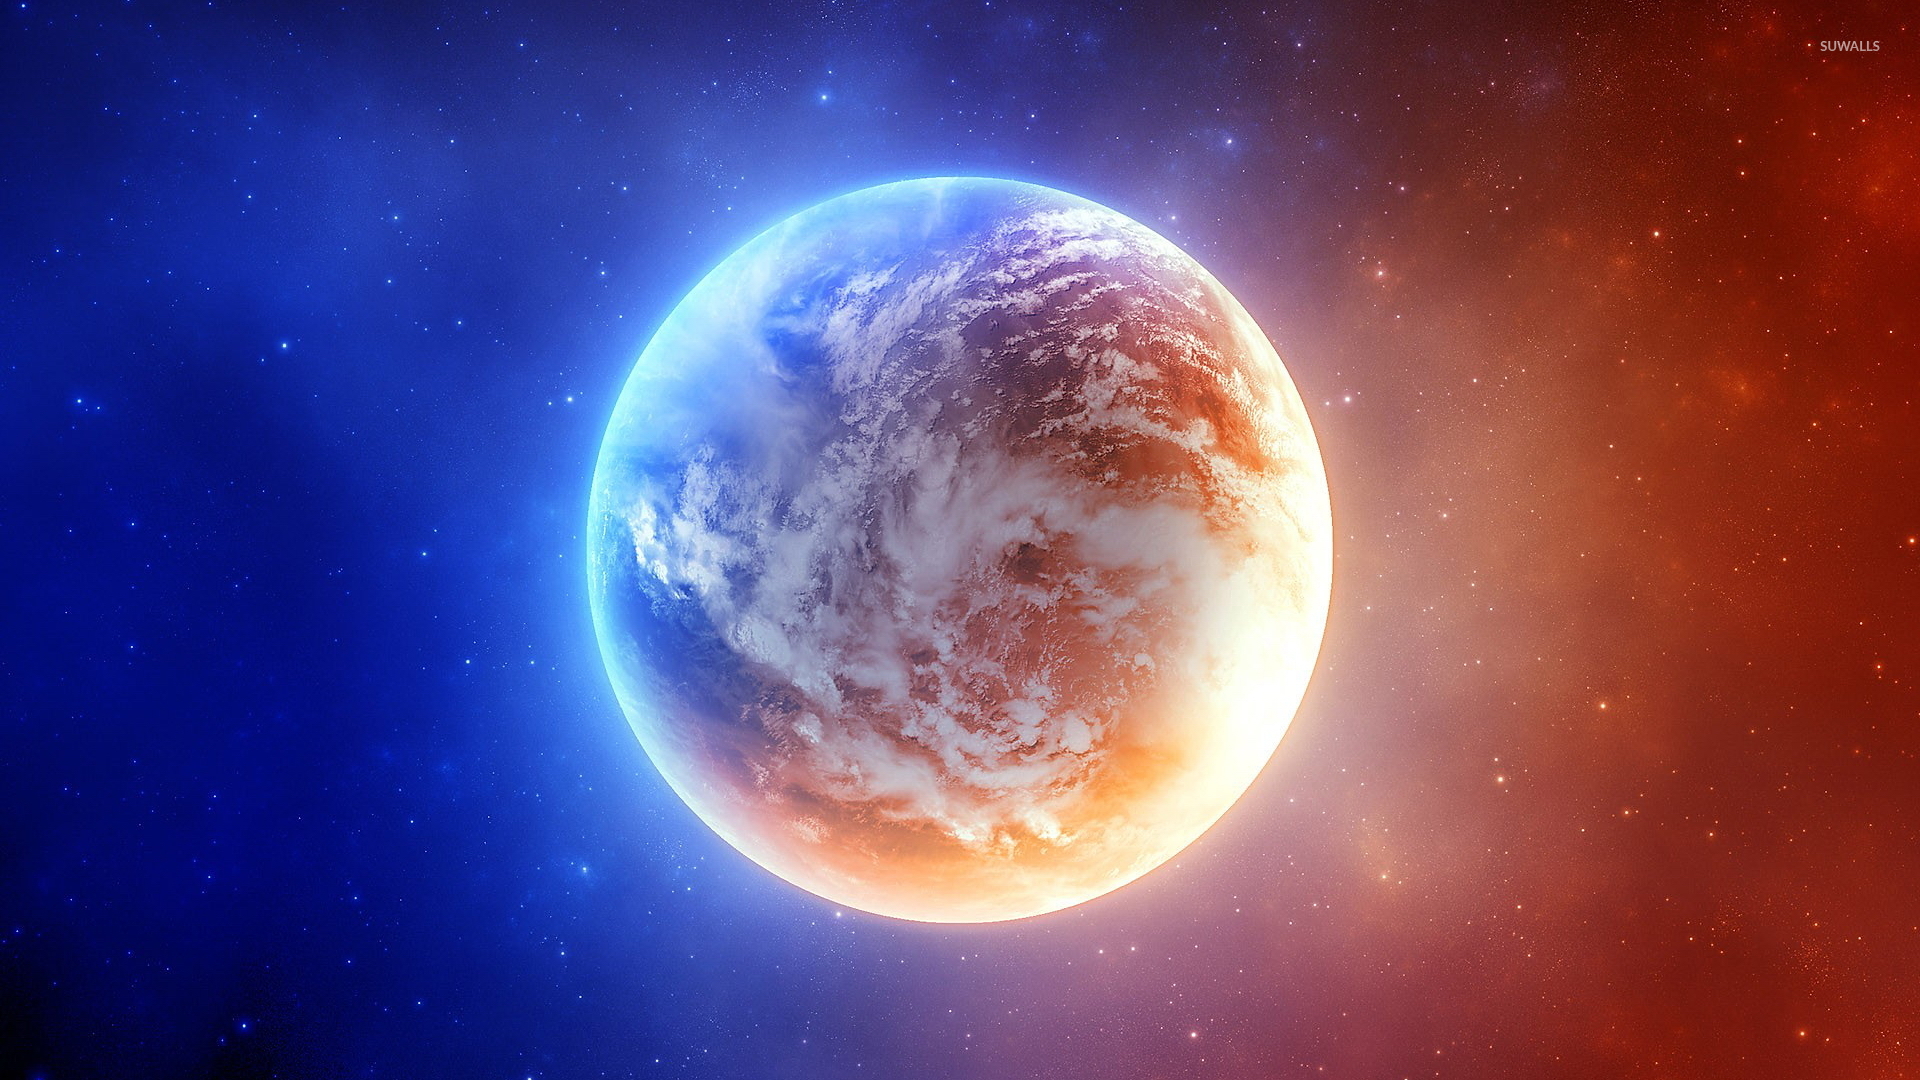 Red and blue planet wallpaper